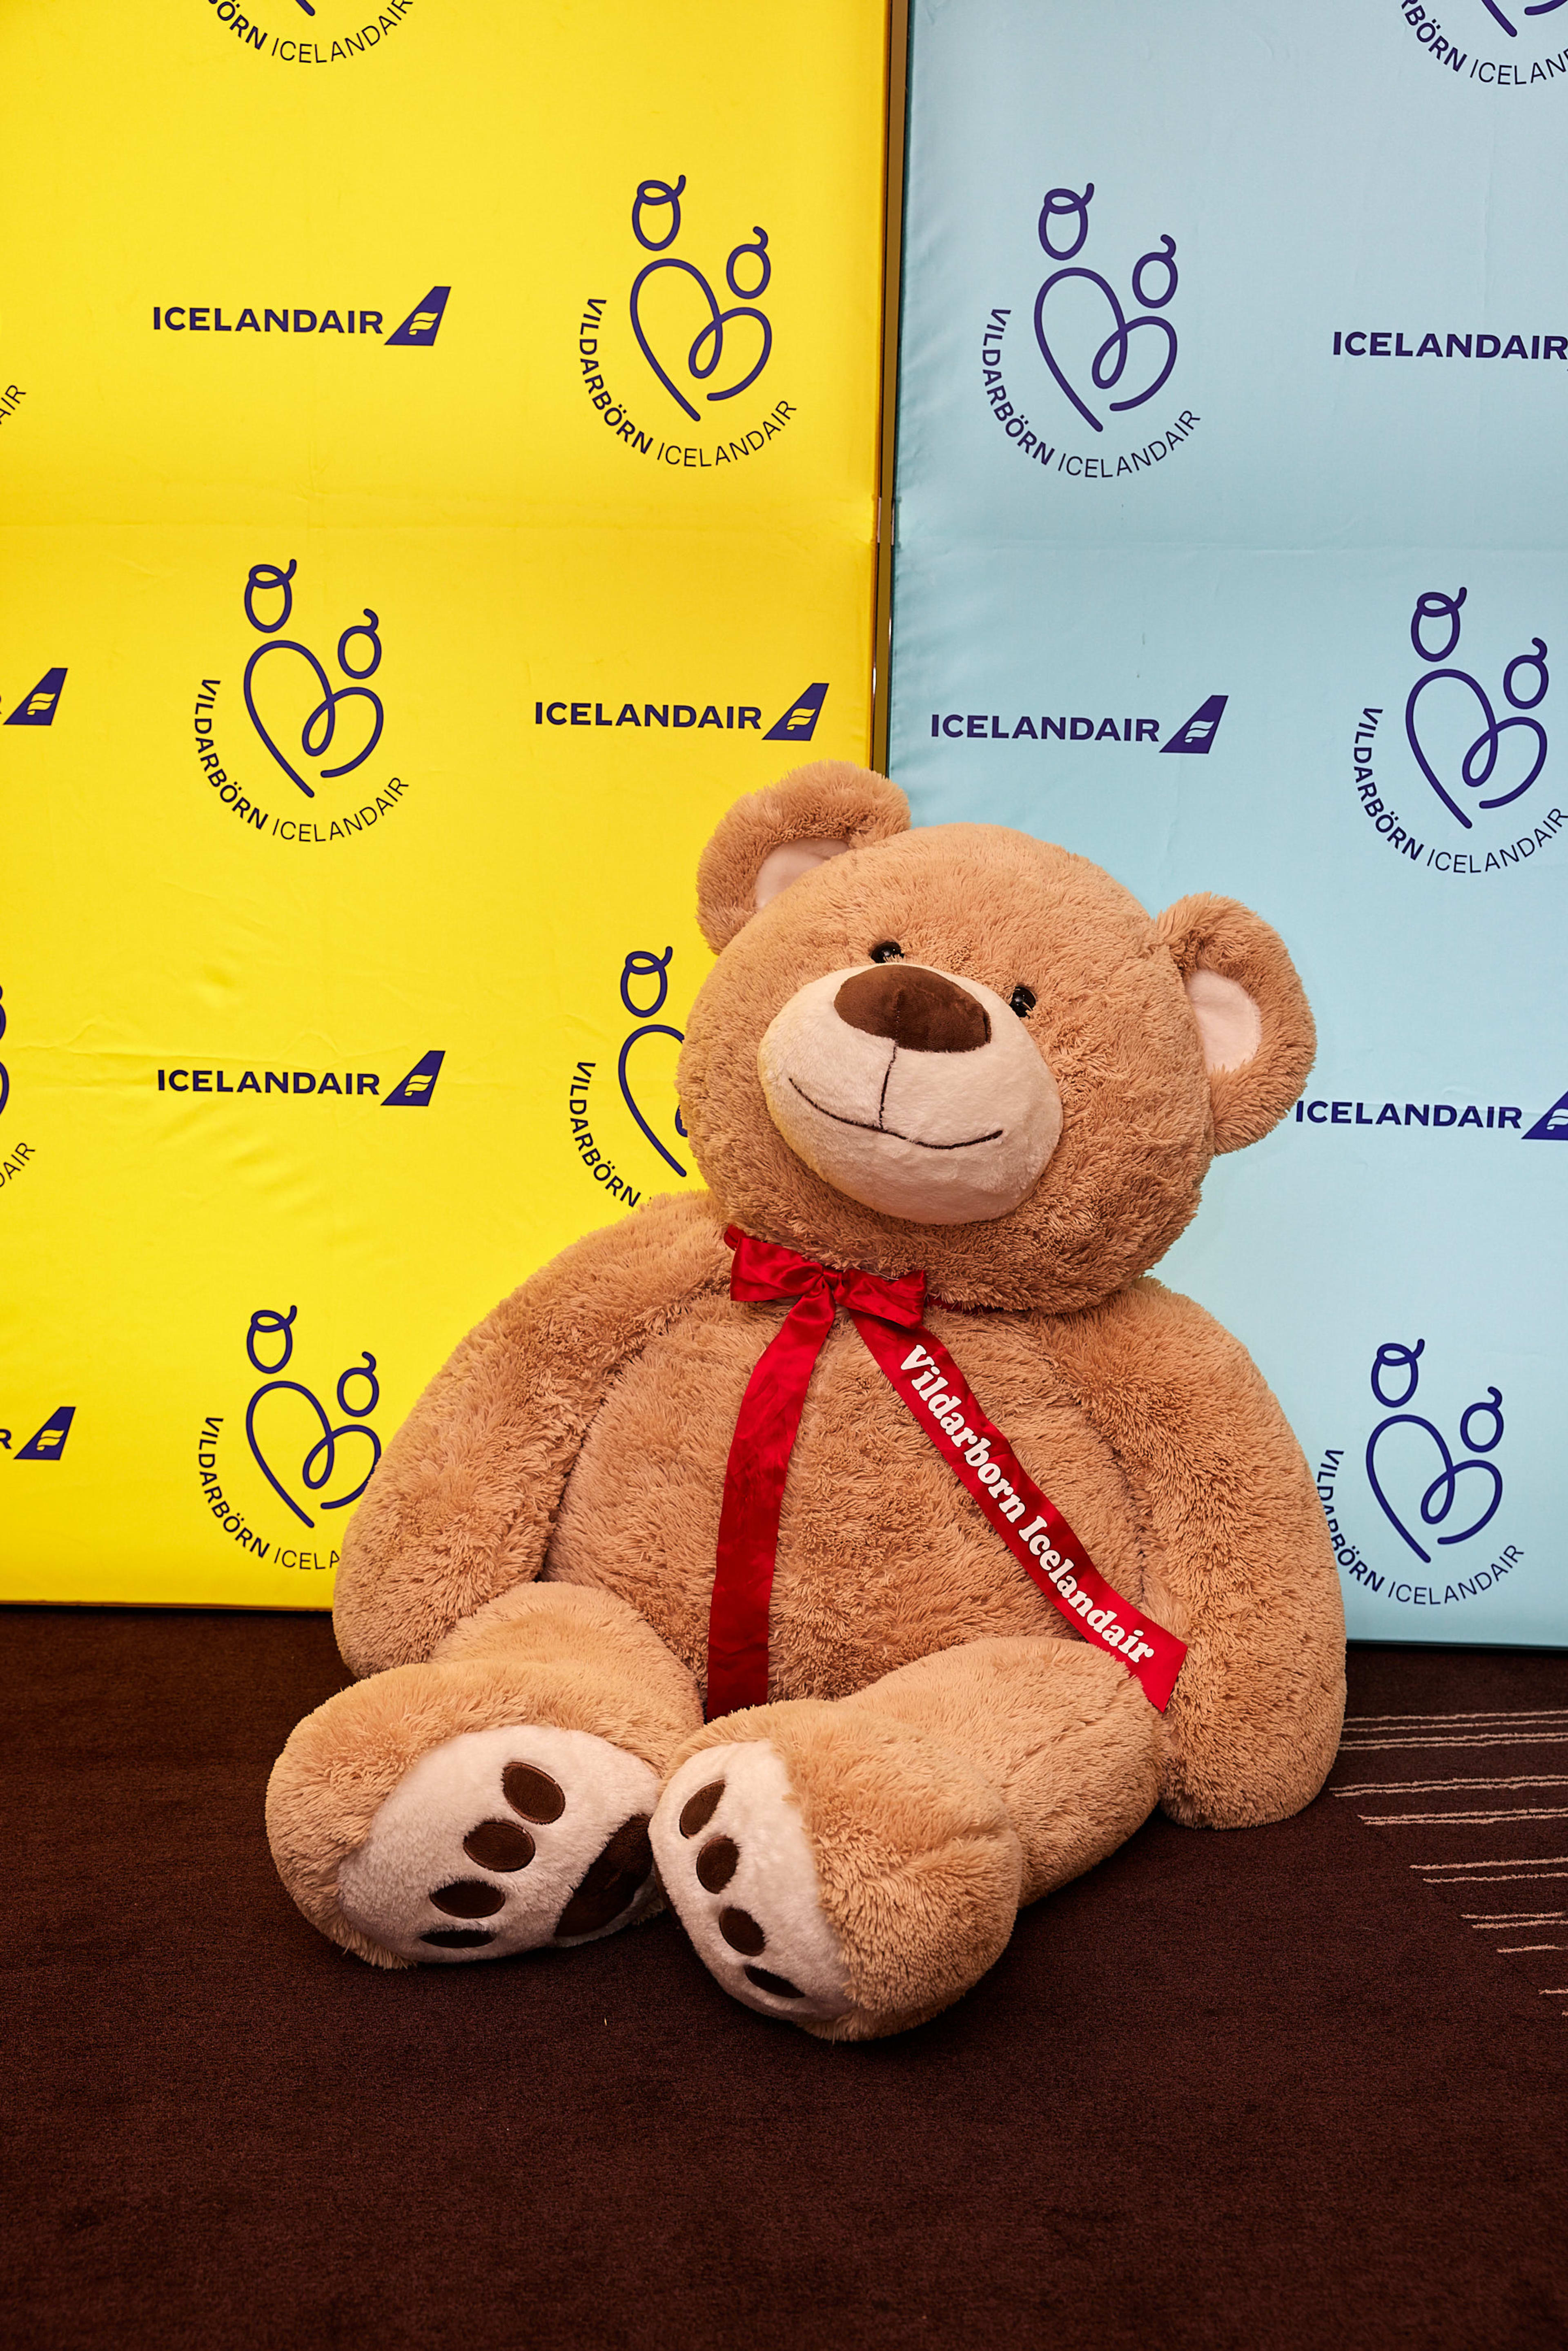 The Special Children Travel Fund teddy bear, a special mascot of the fund.